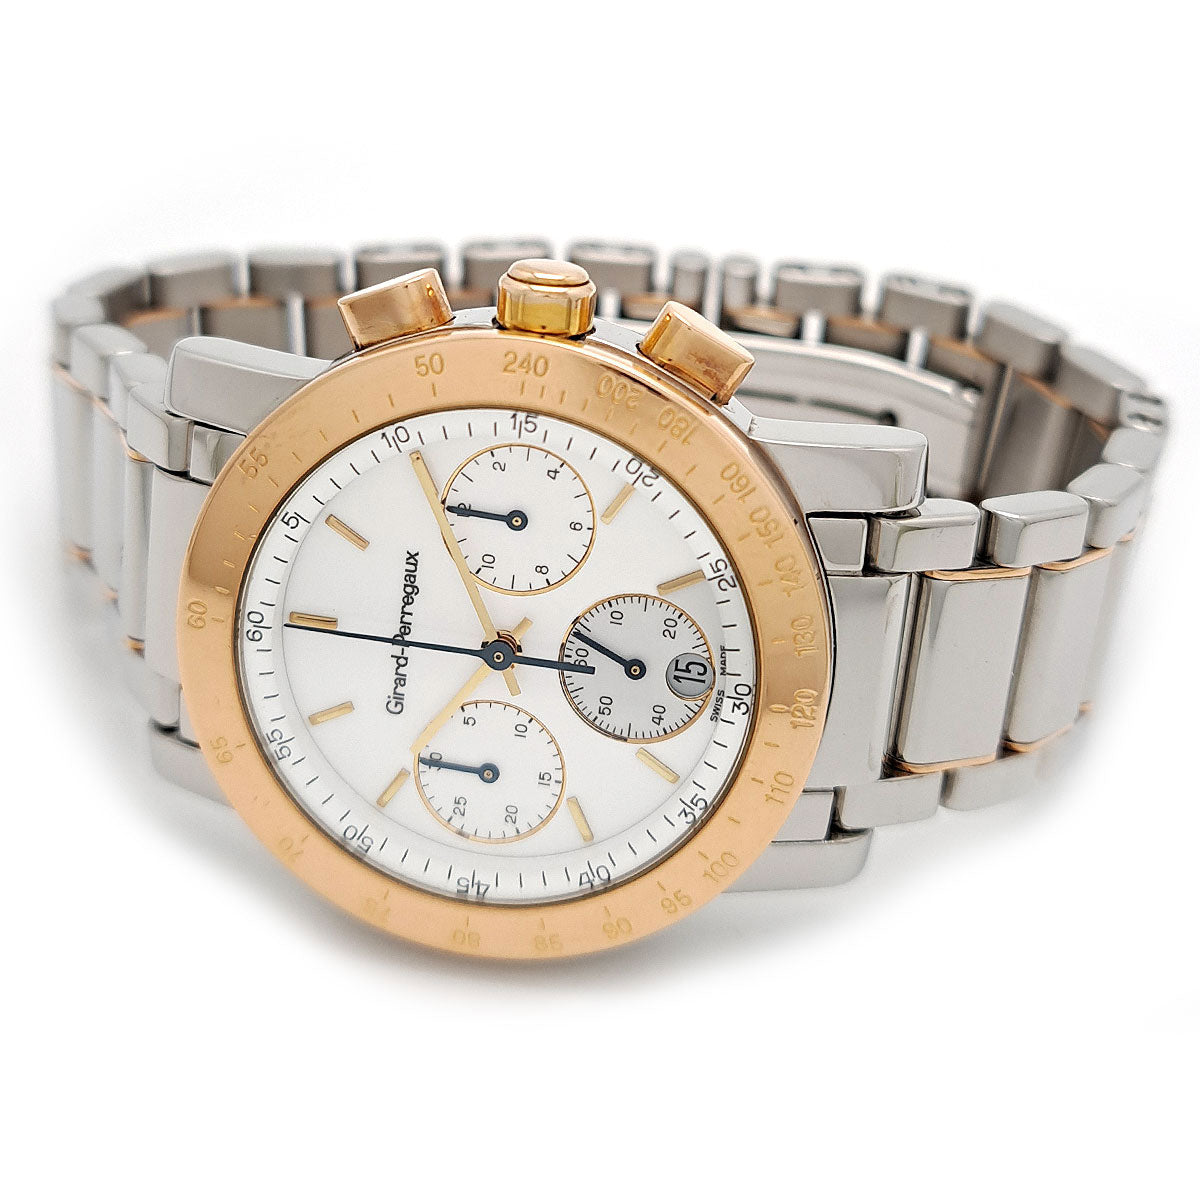 Girard-Perregaux 7001 Chronograph 7700 Quartz Watch, Stainless Steel & Gold Plated, Men's (Pre-owned) 7700.0